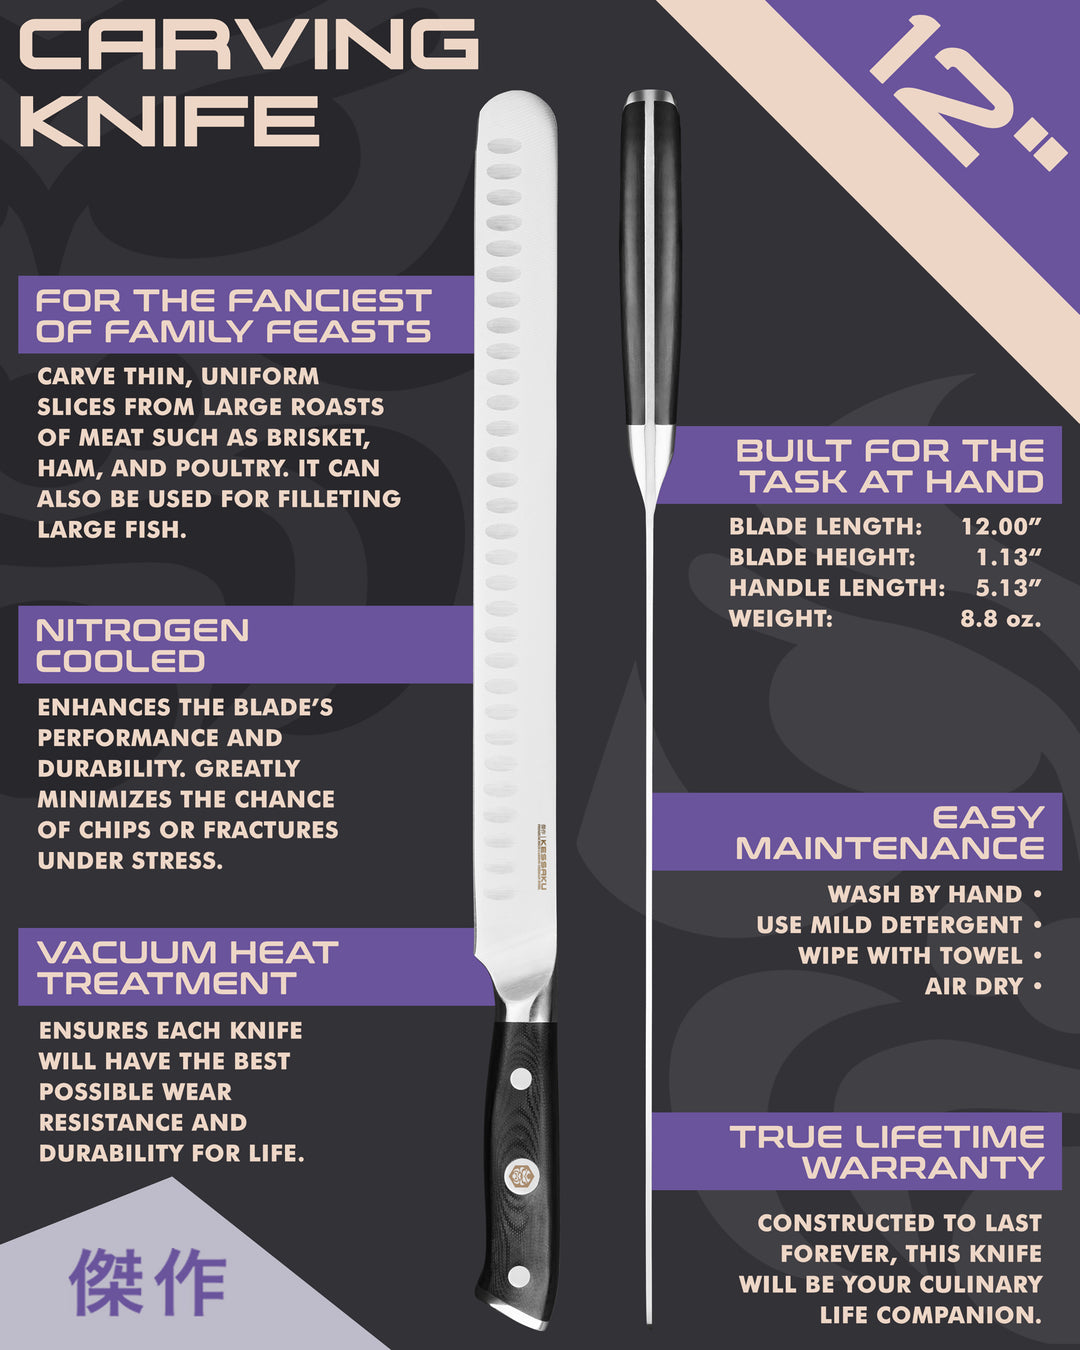 Kessaku Dynasty Series Carving Knife uses, dimensions, maintenance, warranty info, and additional blade treatments